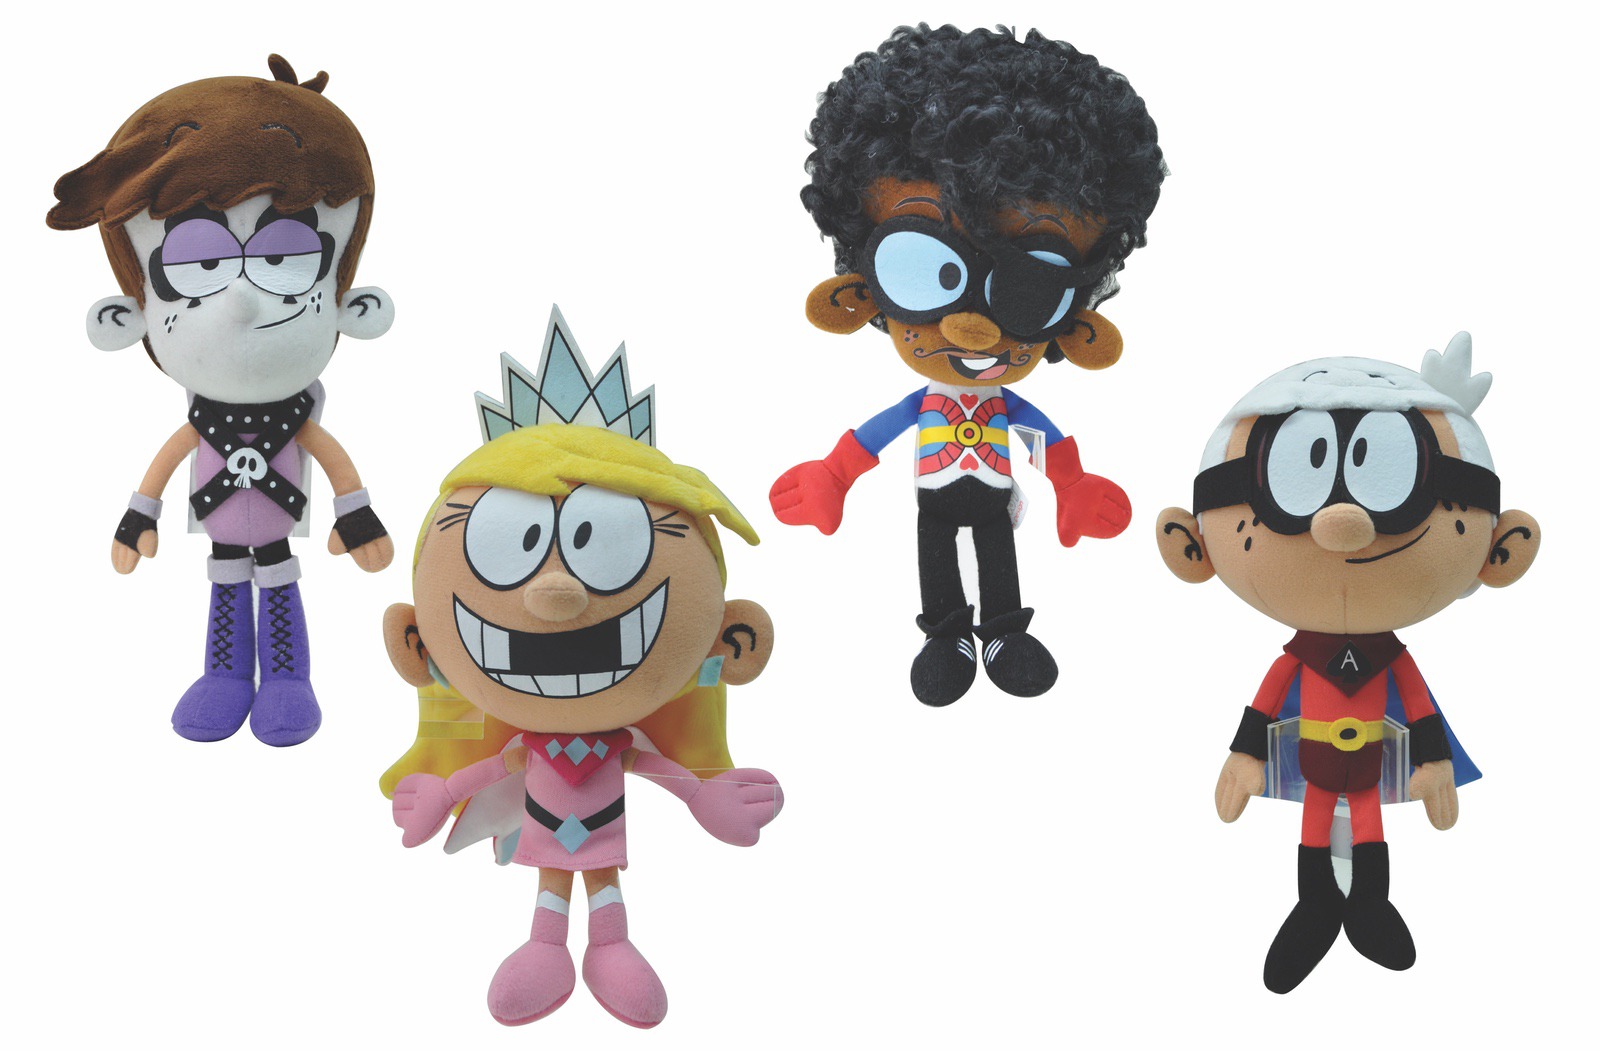 Nickelodeon Loud House Lincoln 6-inch Plush Wicked Cool Toys for sale onlin...